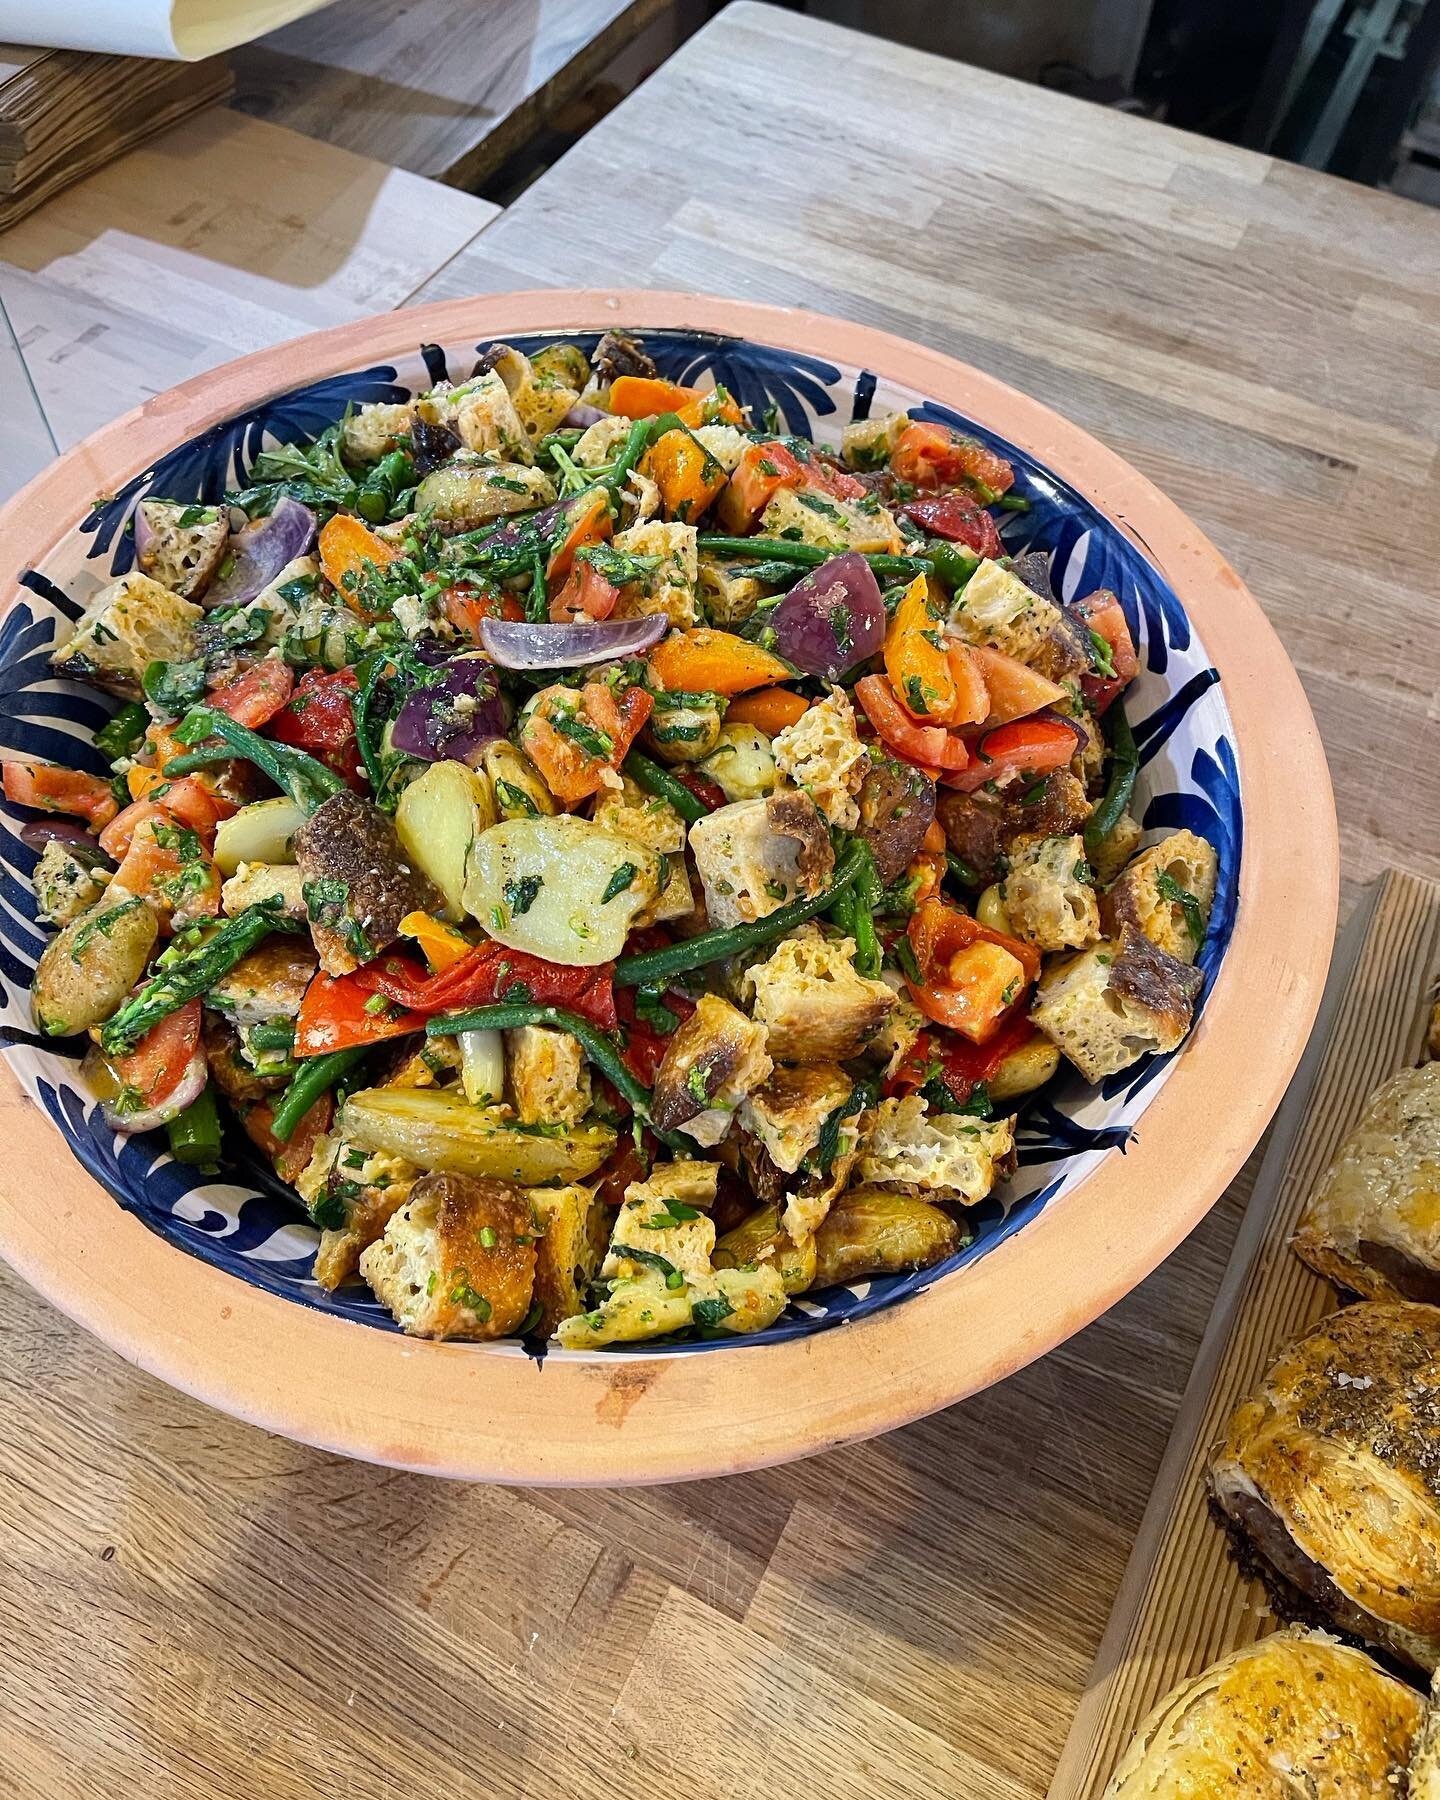 Weather is warmer, time for some salad! 🤤 panzanella on the counter today ( Italian bread salad )!

#panzanella #panzanellasalad #eatwell #eatout #takeout #bread #sourdoughbread #sourdough #bakery #food #delicious #lechlade #lechladeonthames #cotswo